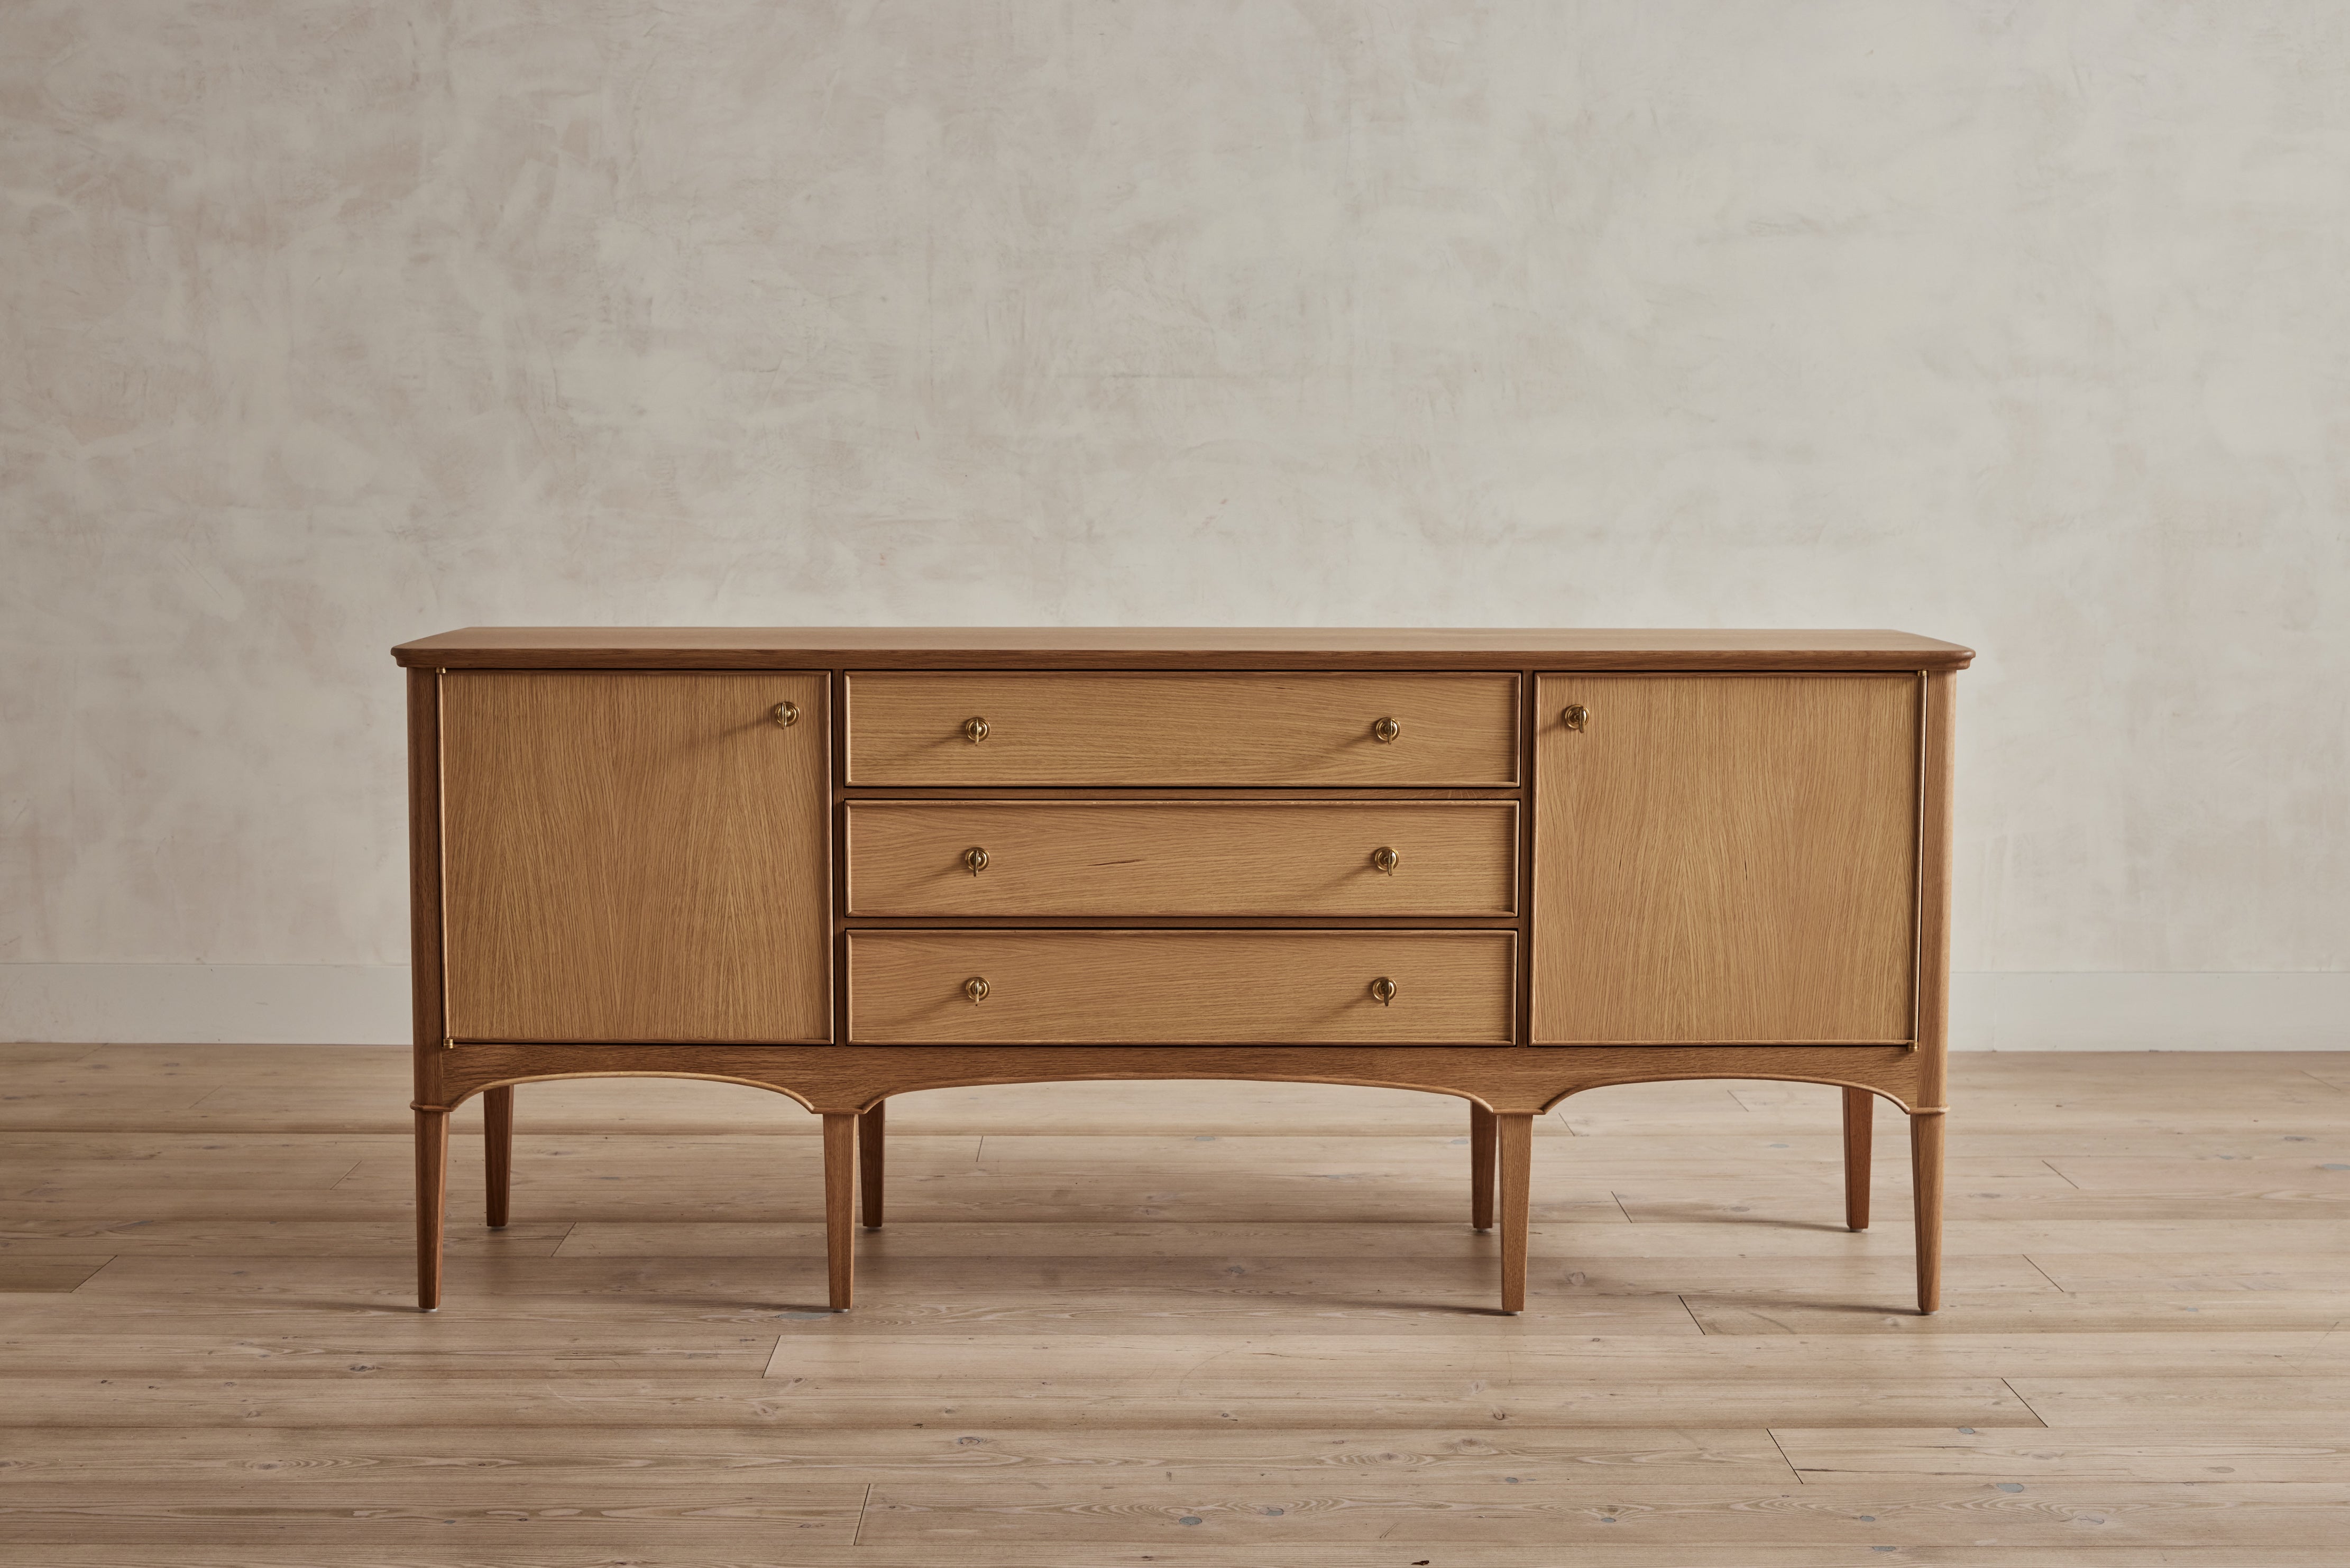 Shown in Natural Oak|AS SHOWN $11,200